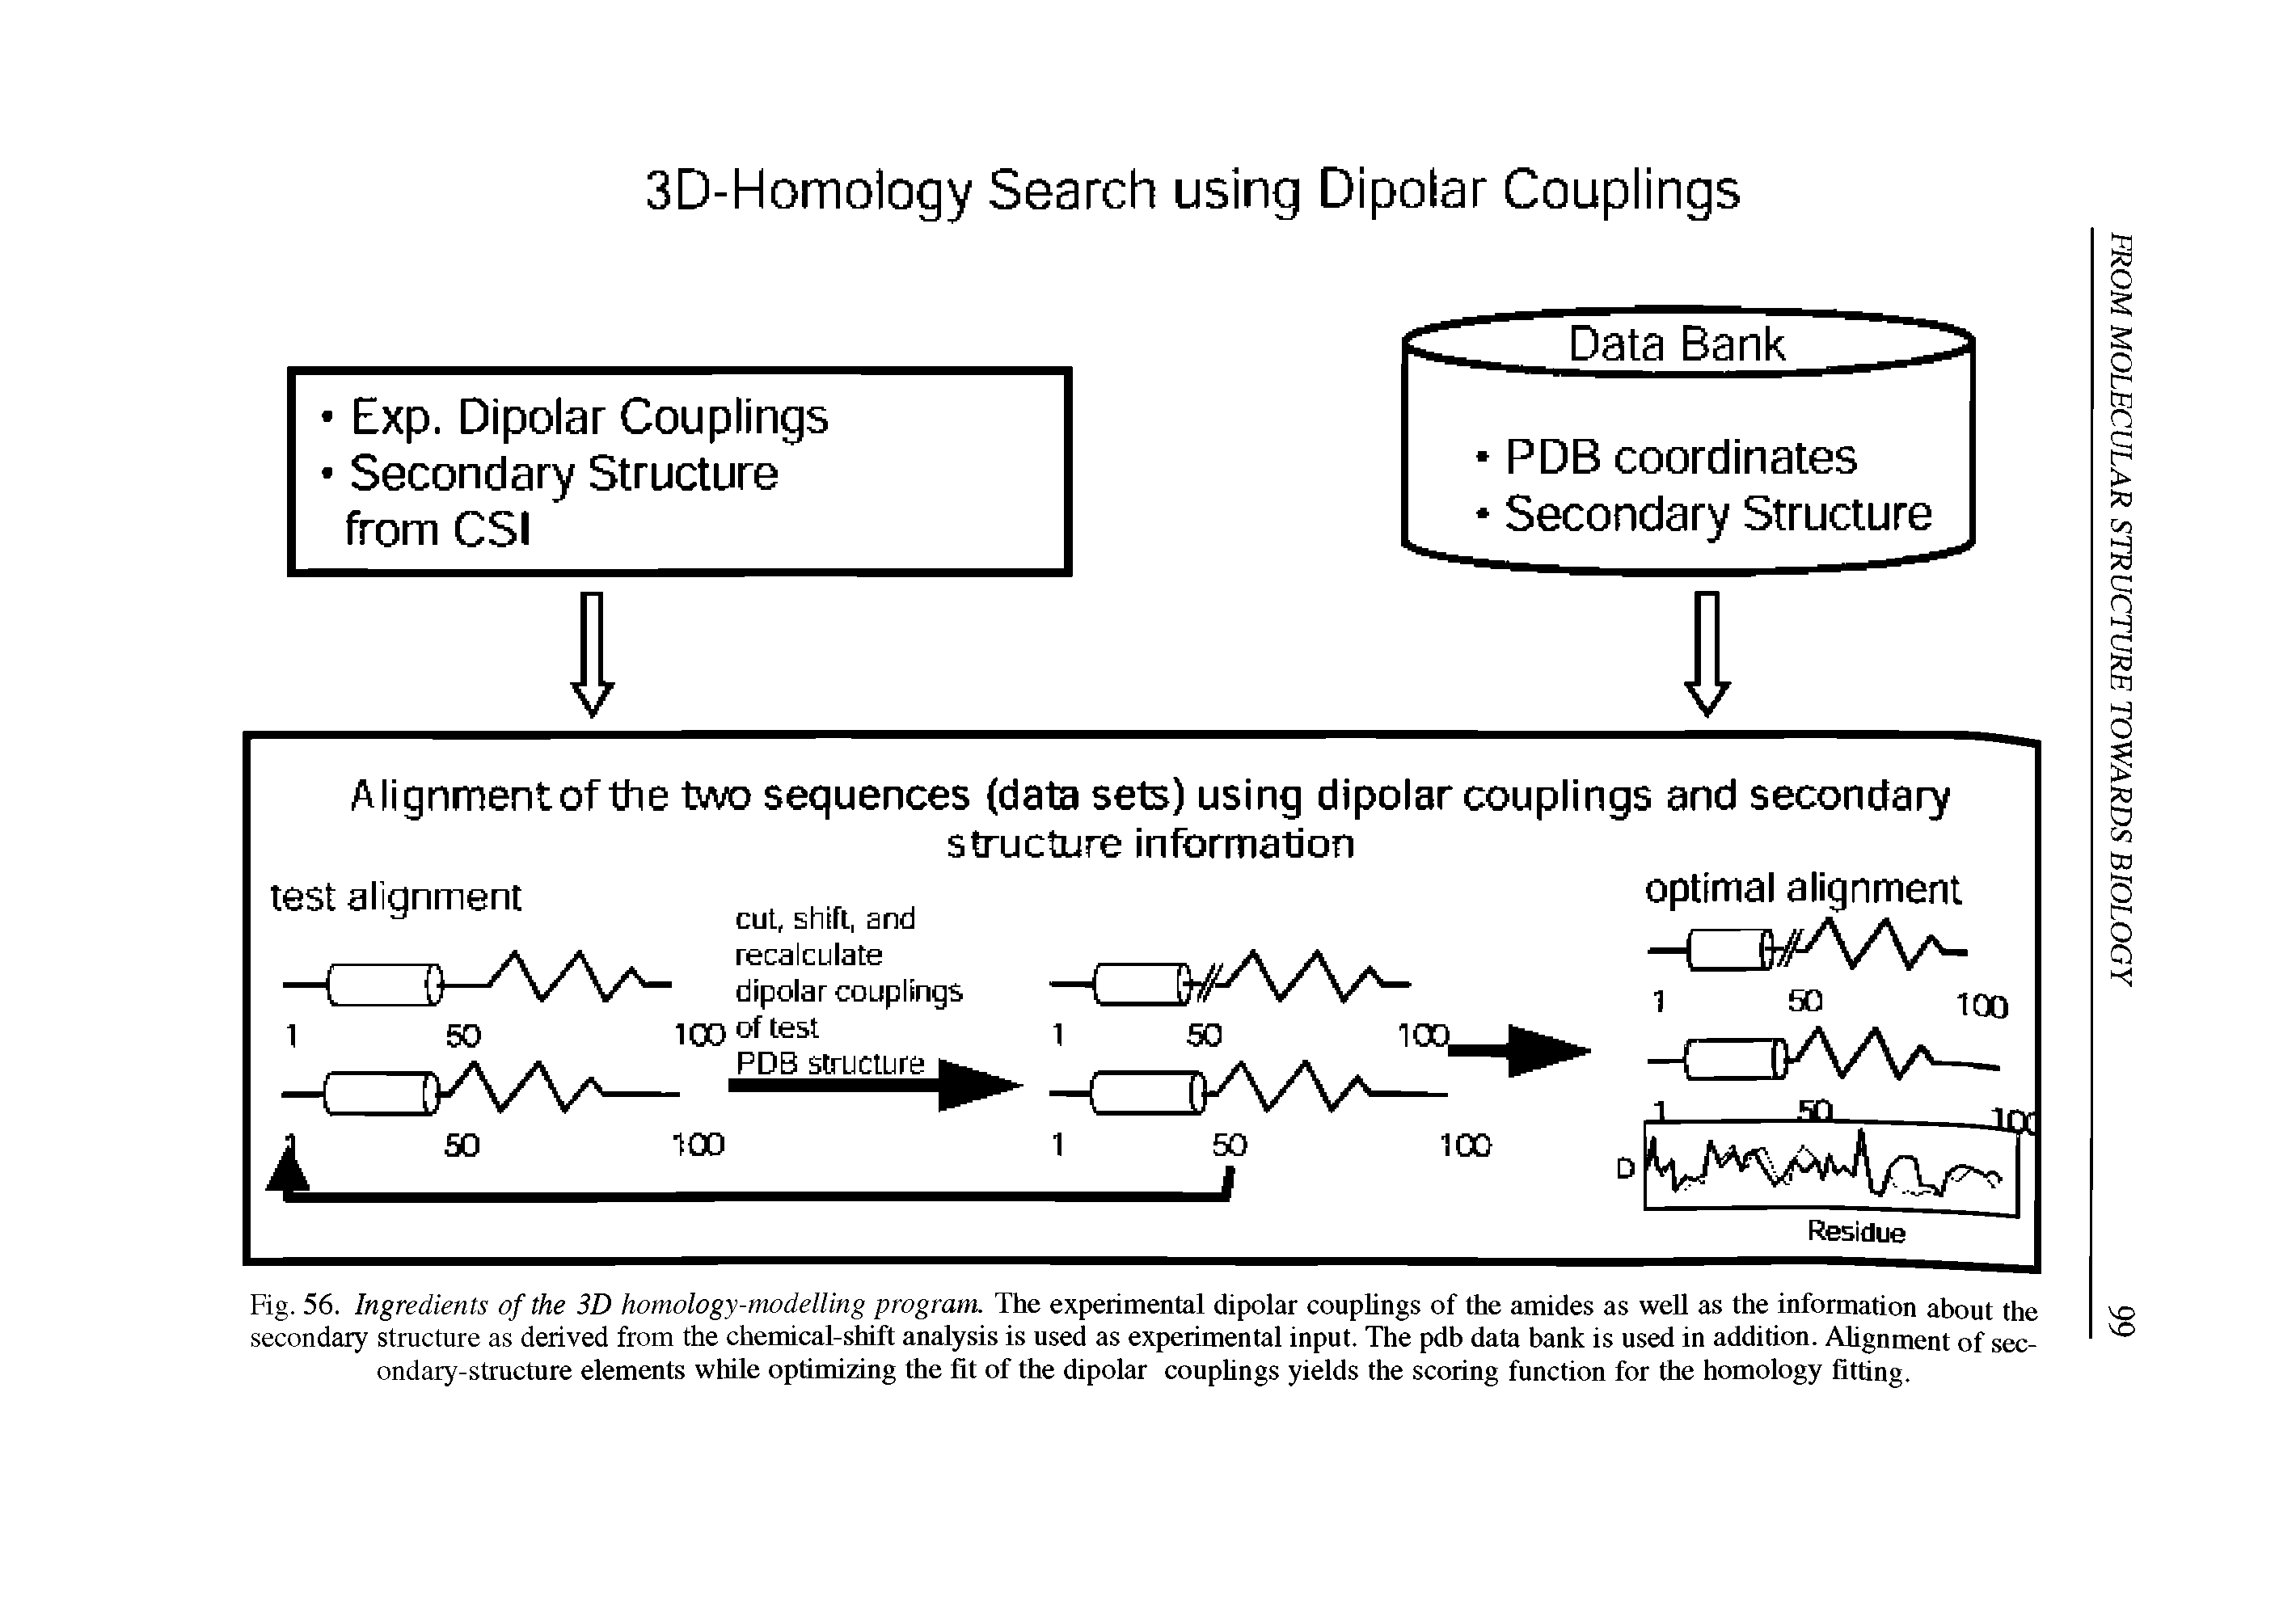 Fig. 56. Ingredients of the 3D homology-modelling program. The experimental dipolar couplings of the amides as well as the information about the secondary structure as derived from the chemical-shift analysis is used as experimental input. The pdb data bank is used in addition. Alignment of sec-ondary-stmcture elements while optimizing the fit of the dipolar couphngs yields the scoring function for the homology fitting.